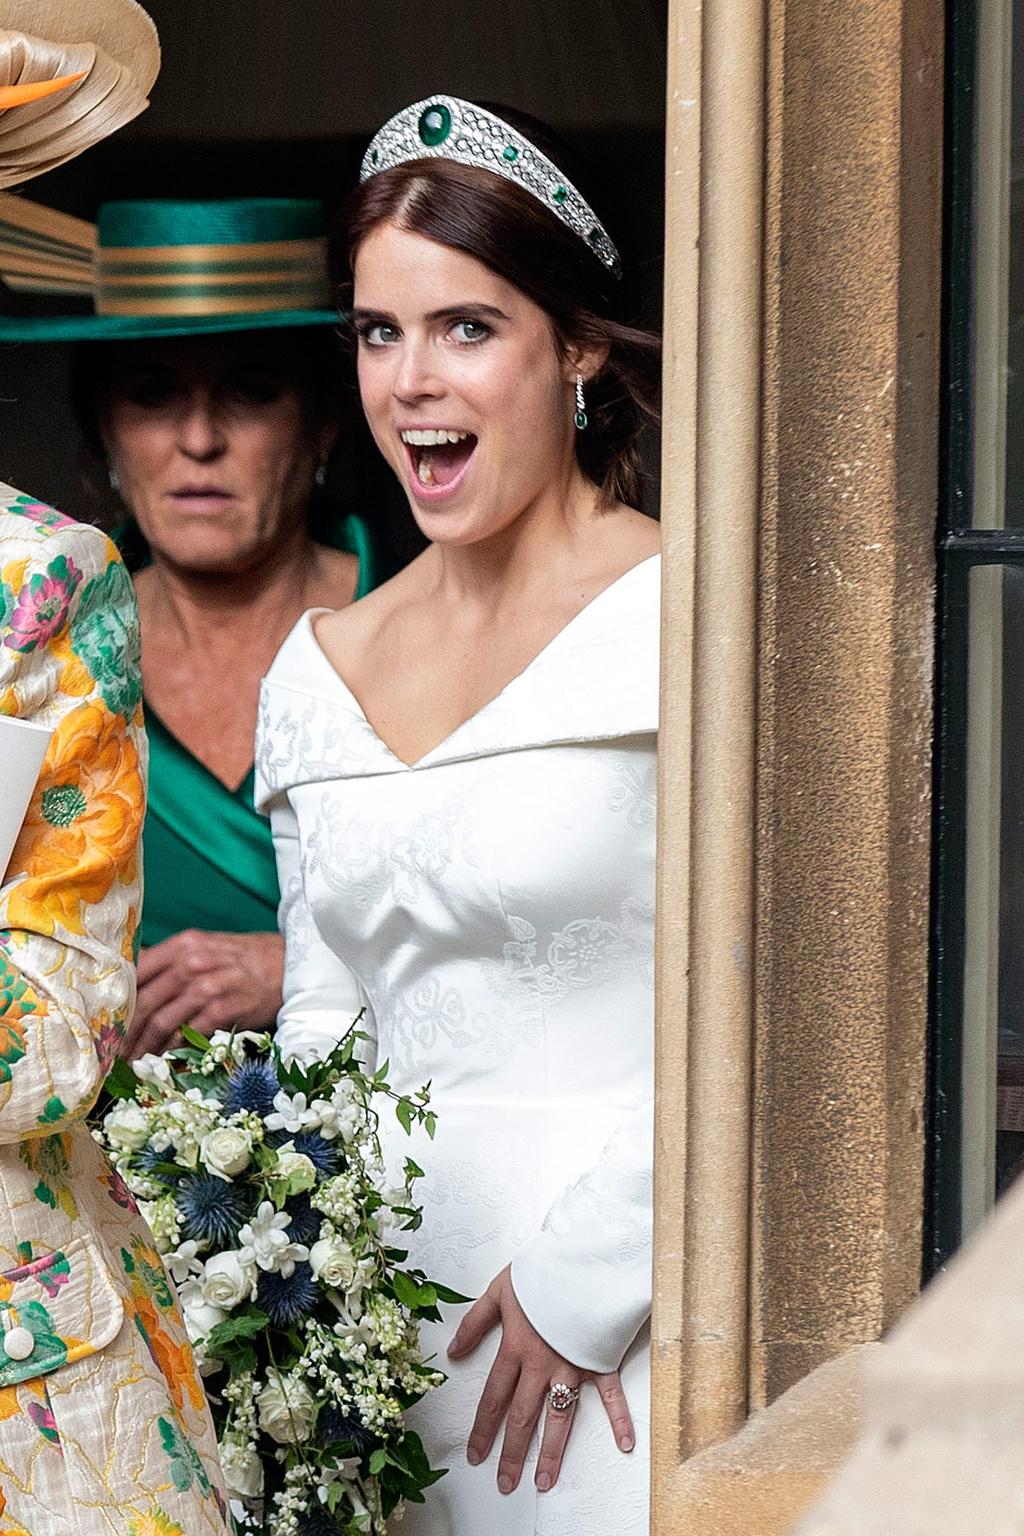 Princess Eugenie on her wedding day. Image credit: Getty Images